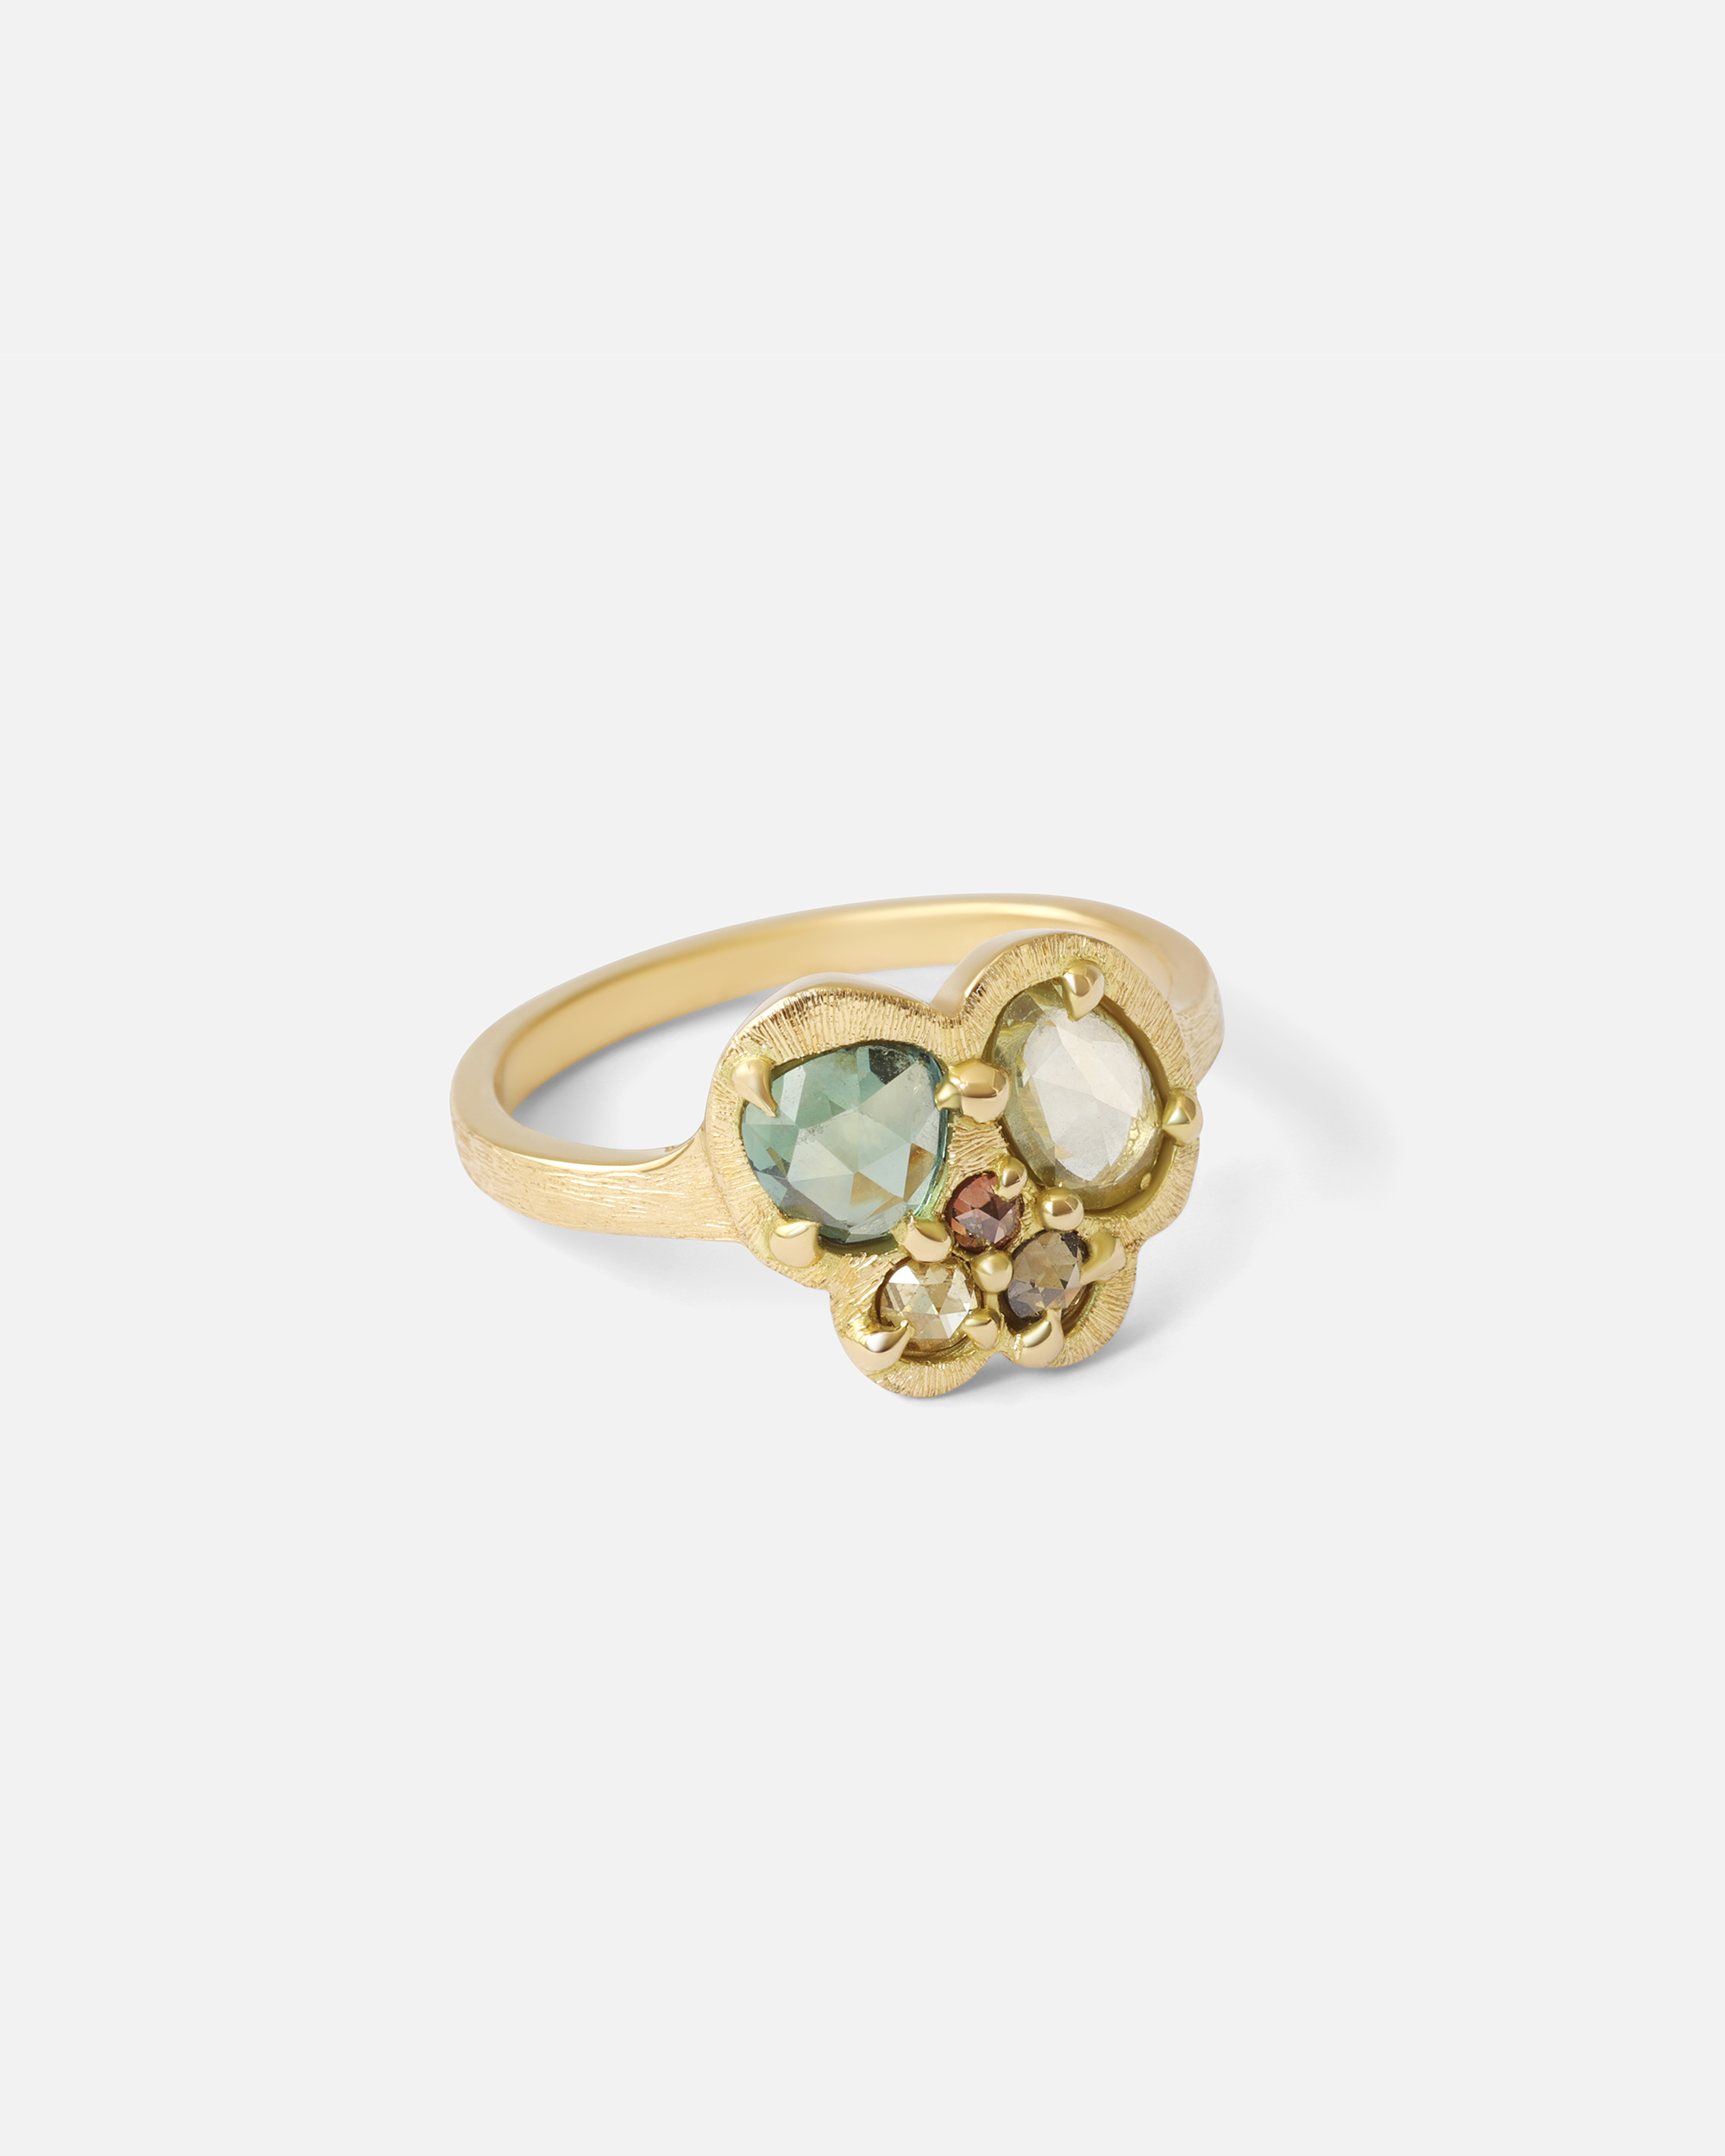 Silk / Teal and Lime Cluster Ring By Hiroyo